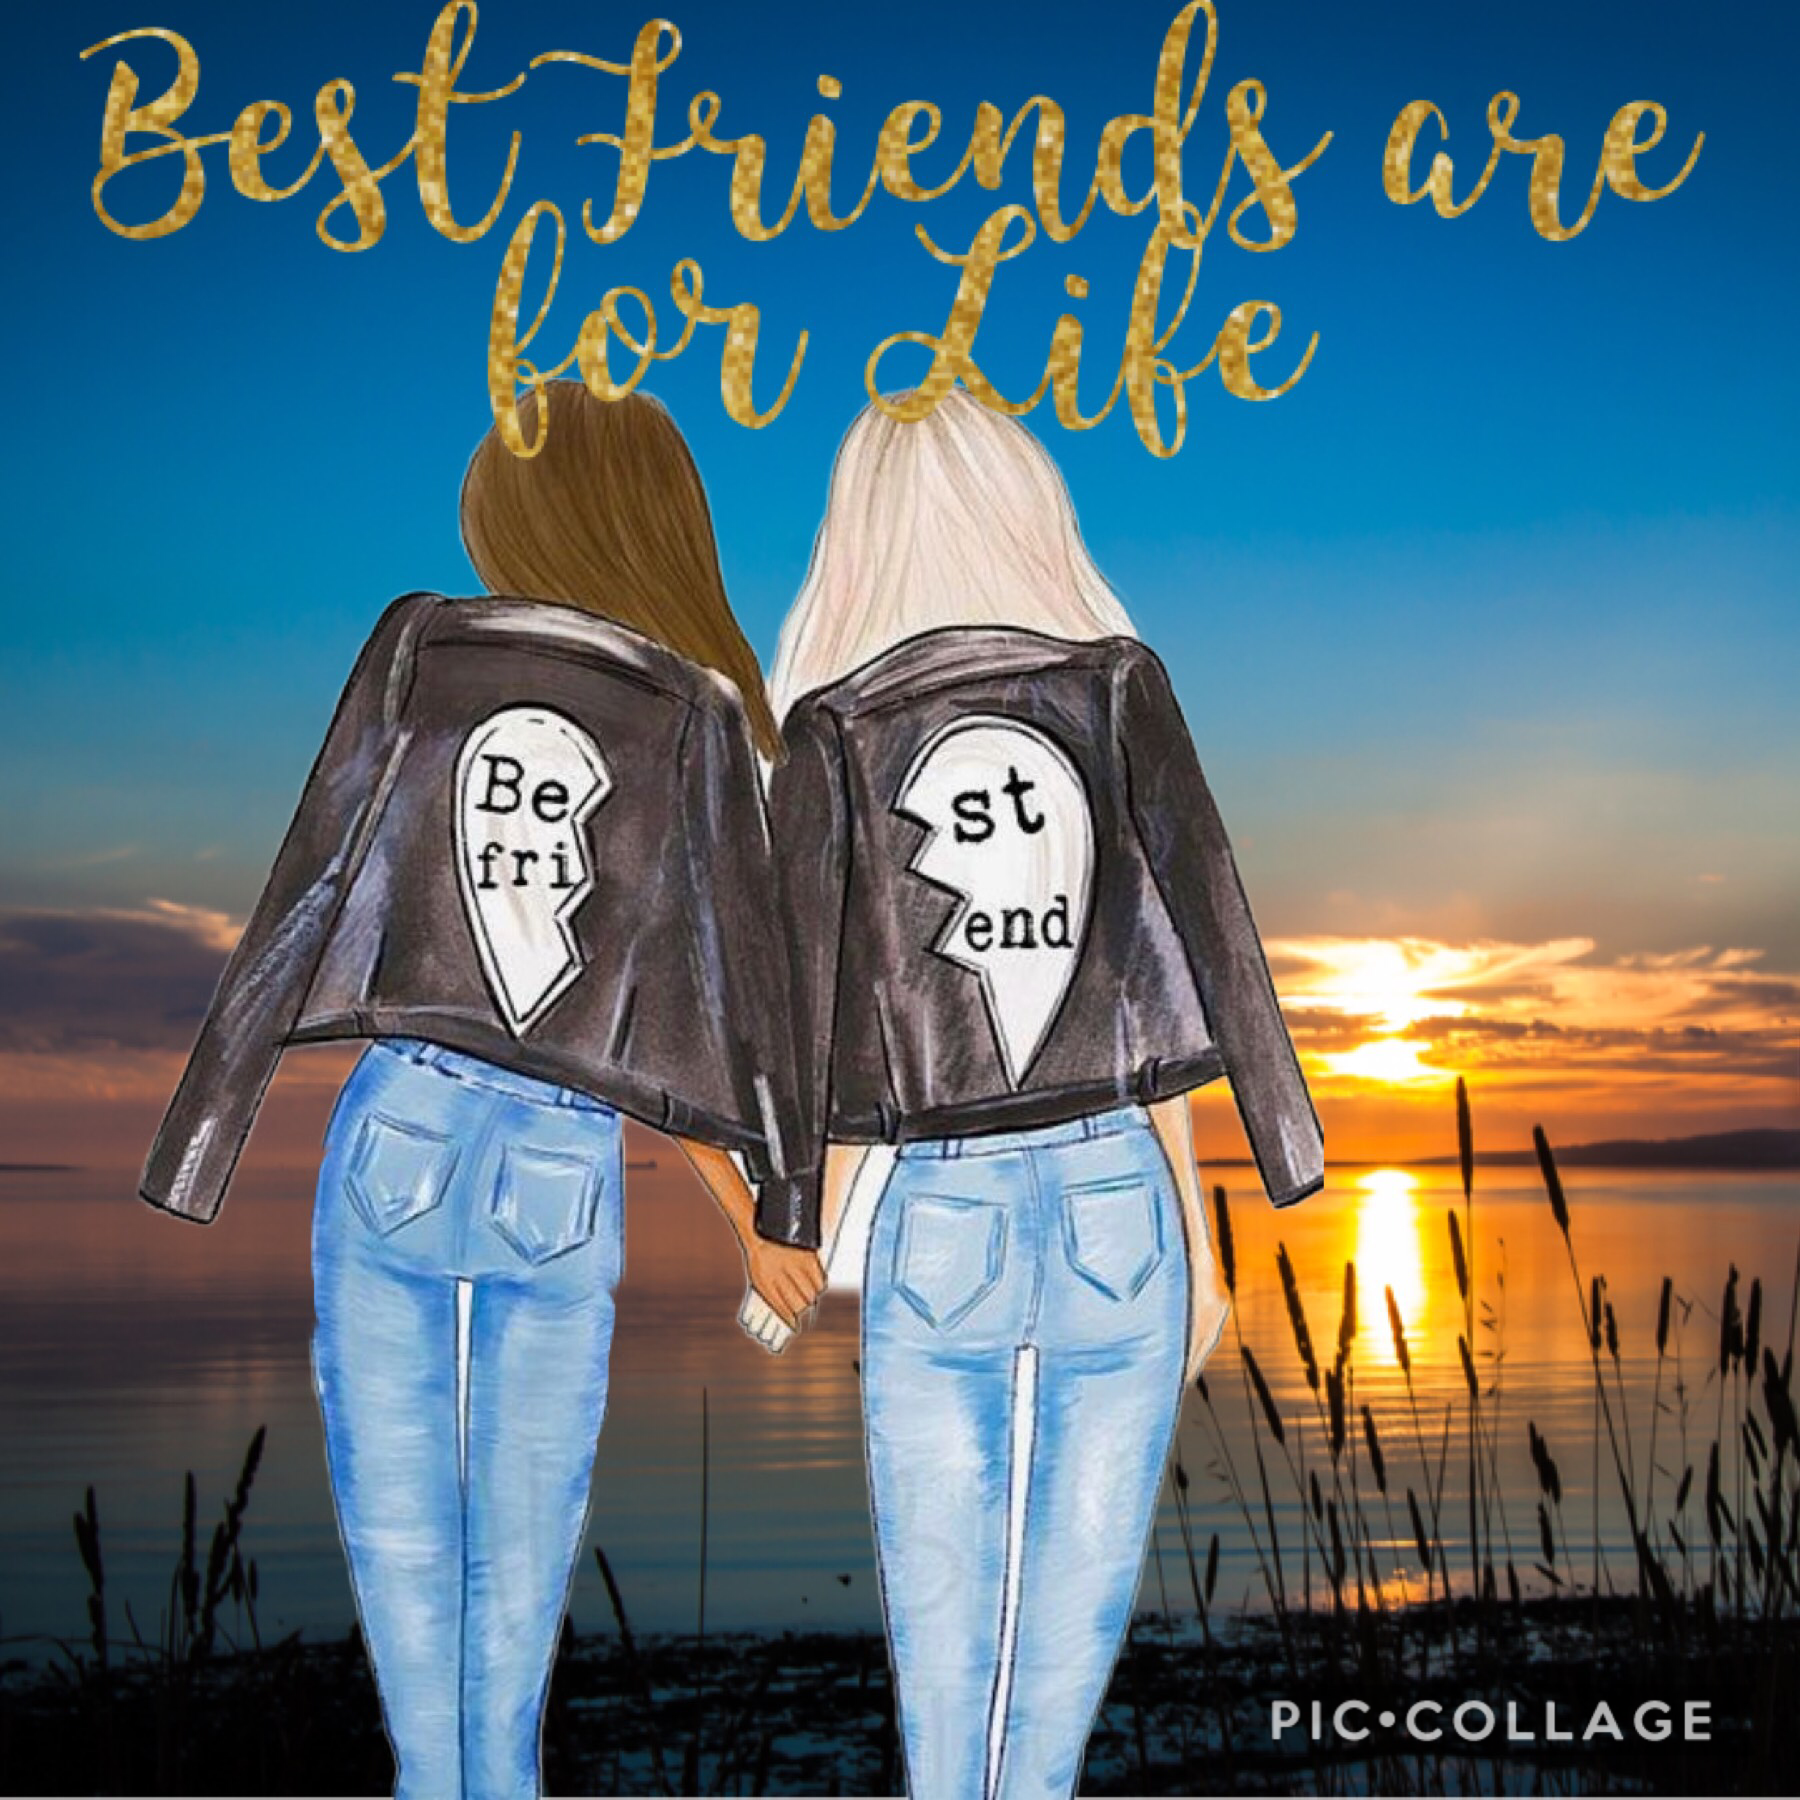 Best Friends are for Life so Savor Every Moment!!